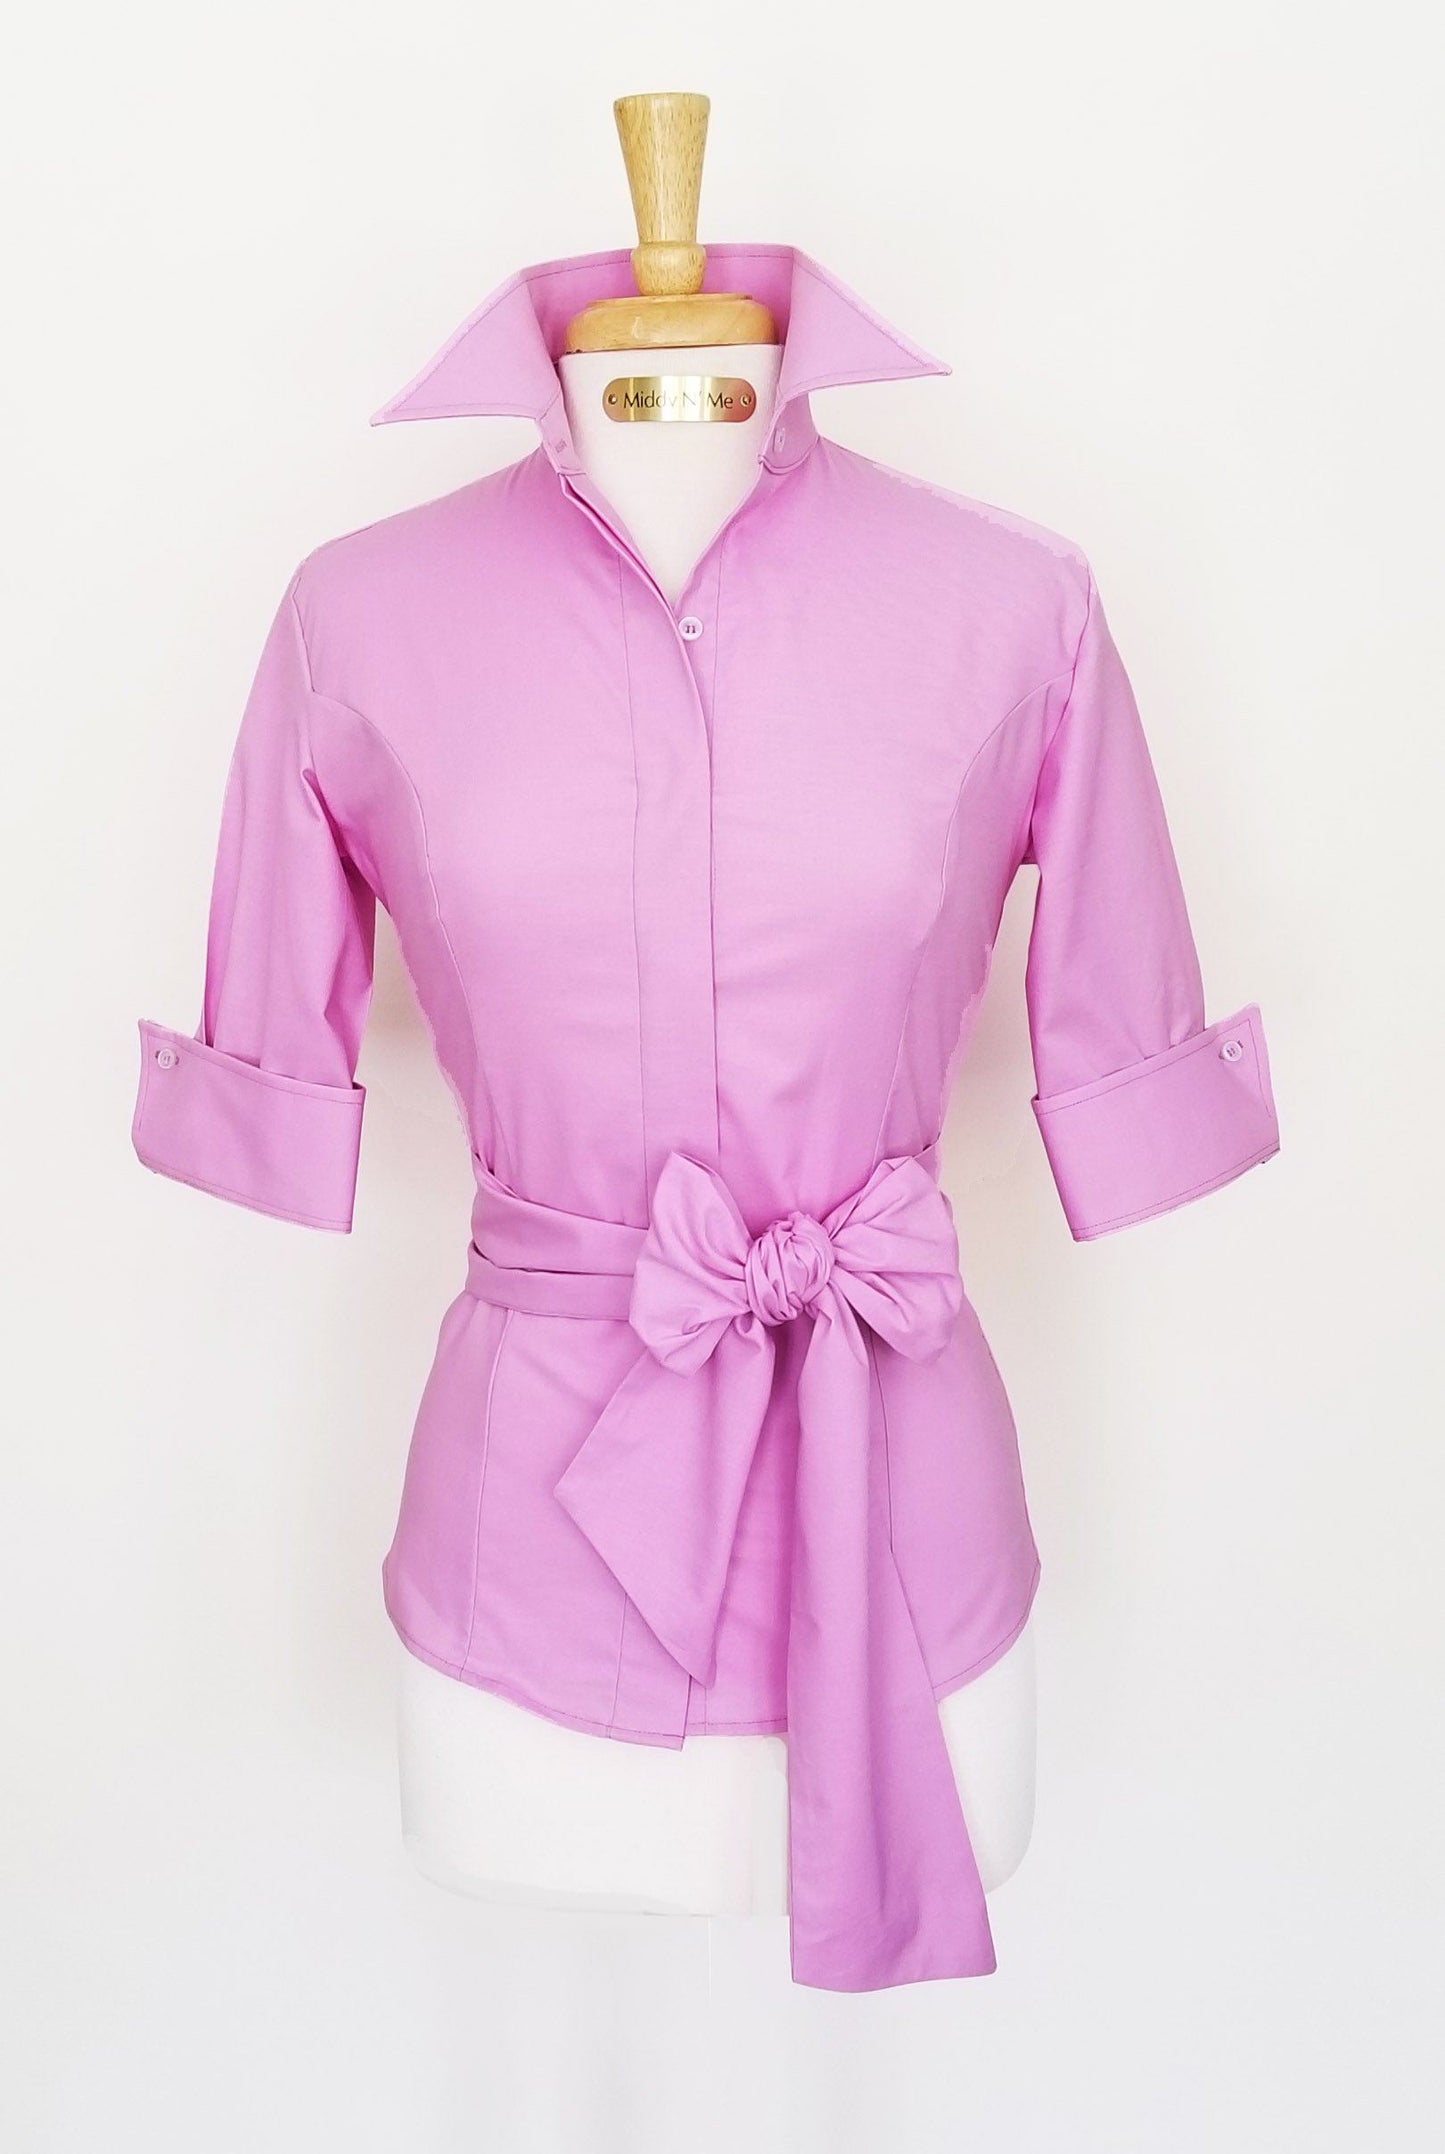 SUMMER RIDE SHIRT WITH SASH IN BALLERINA - Middy N' Me